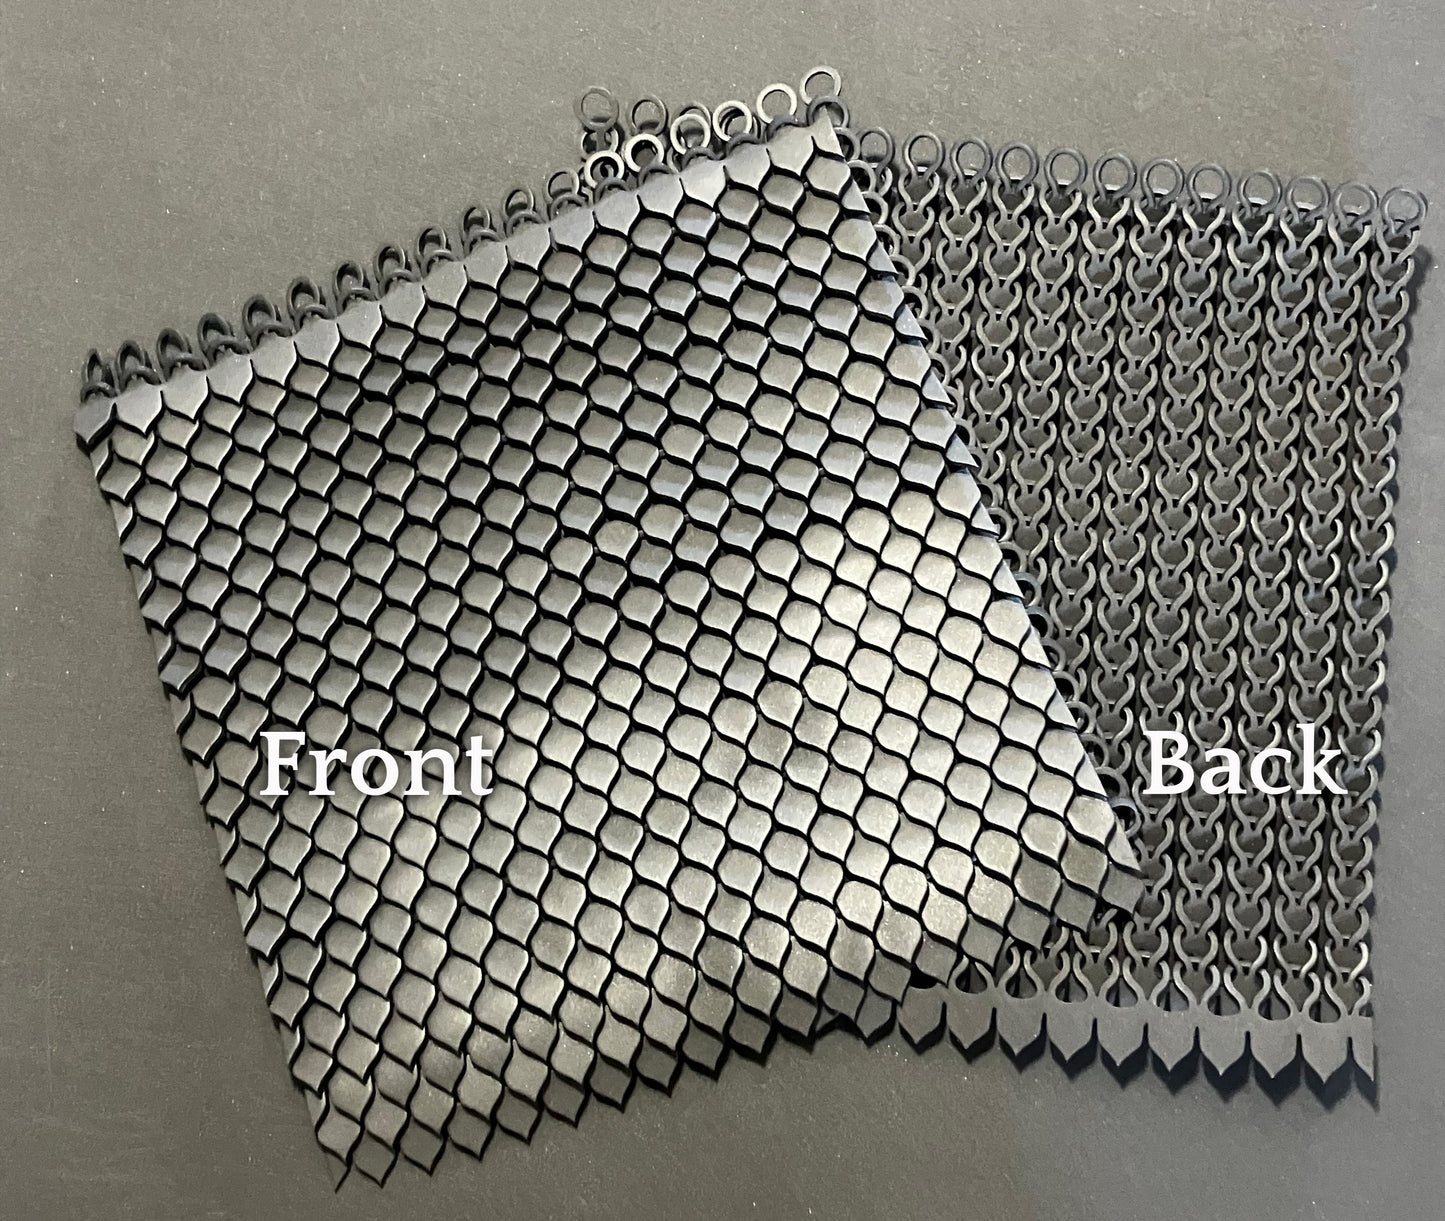 Unpainted black EVA Foam Scalemaille 12 x12" square for Armor or decoration